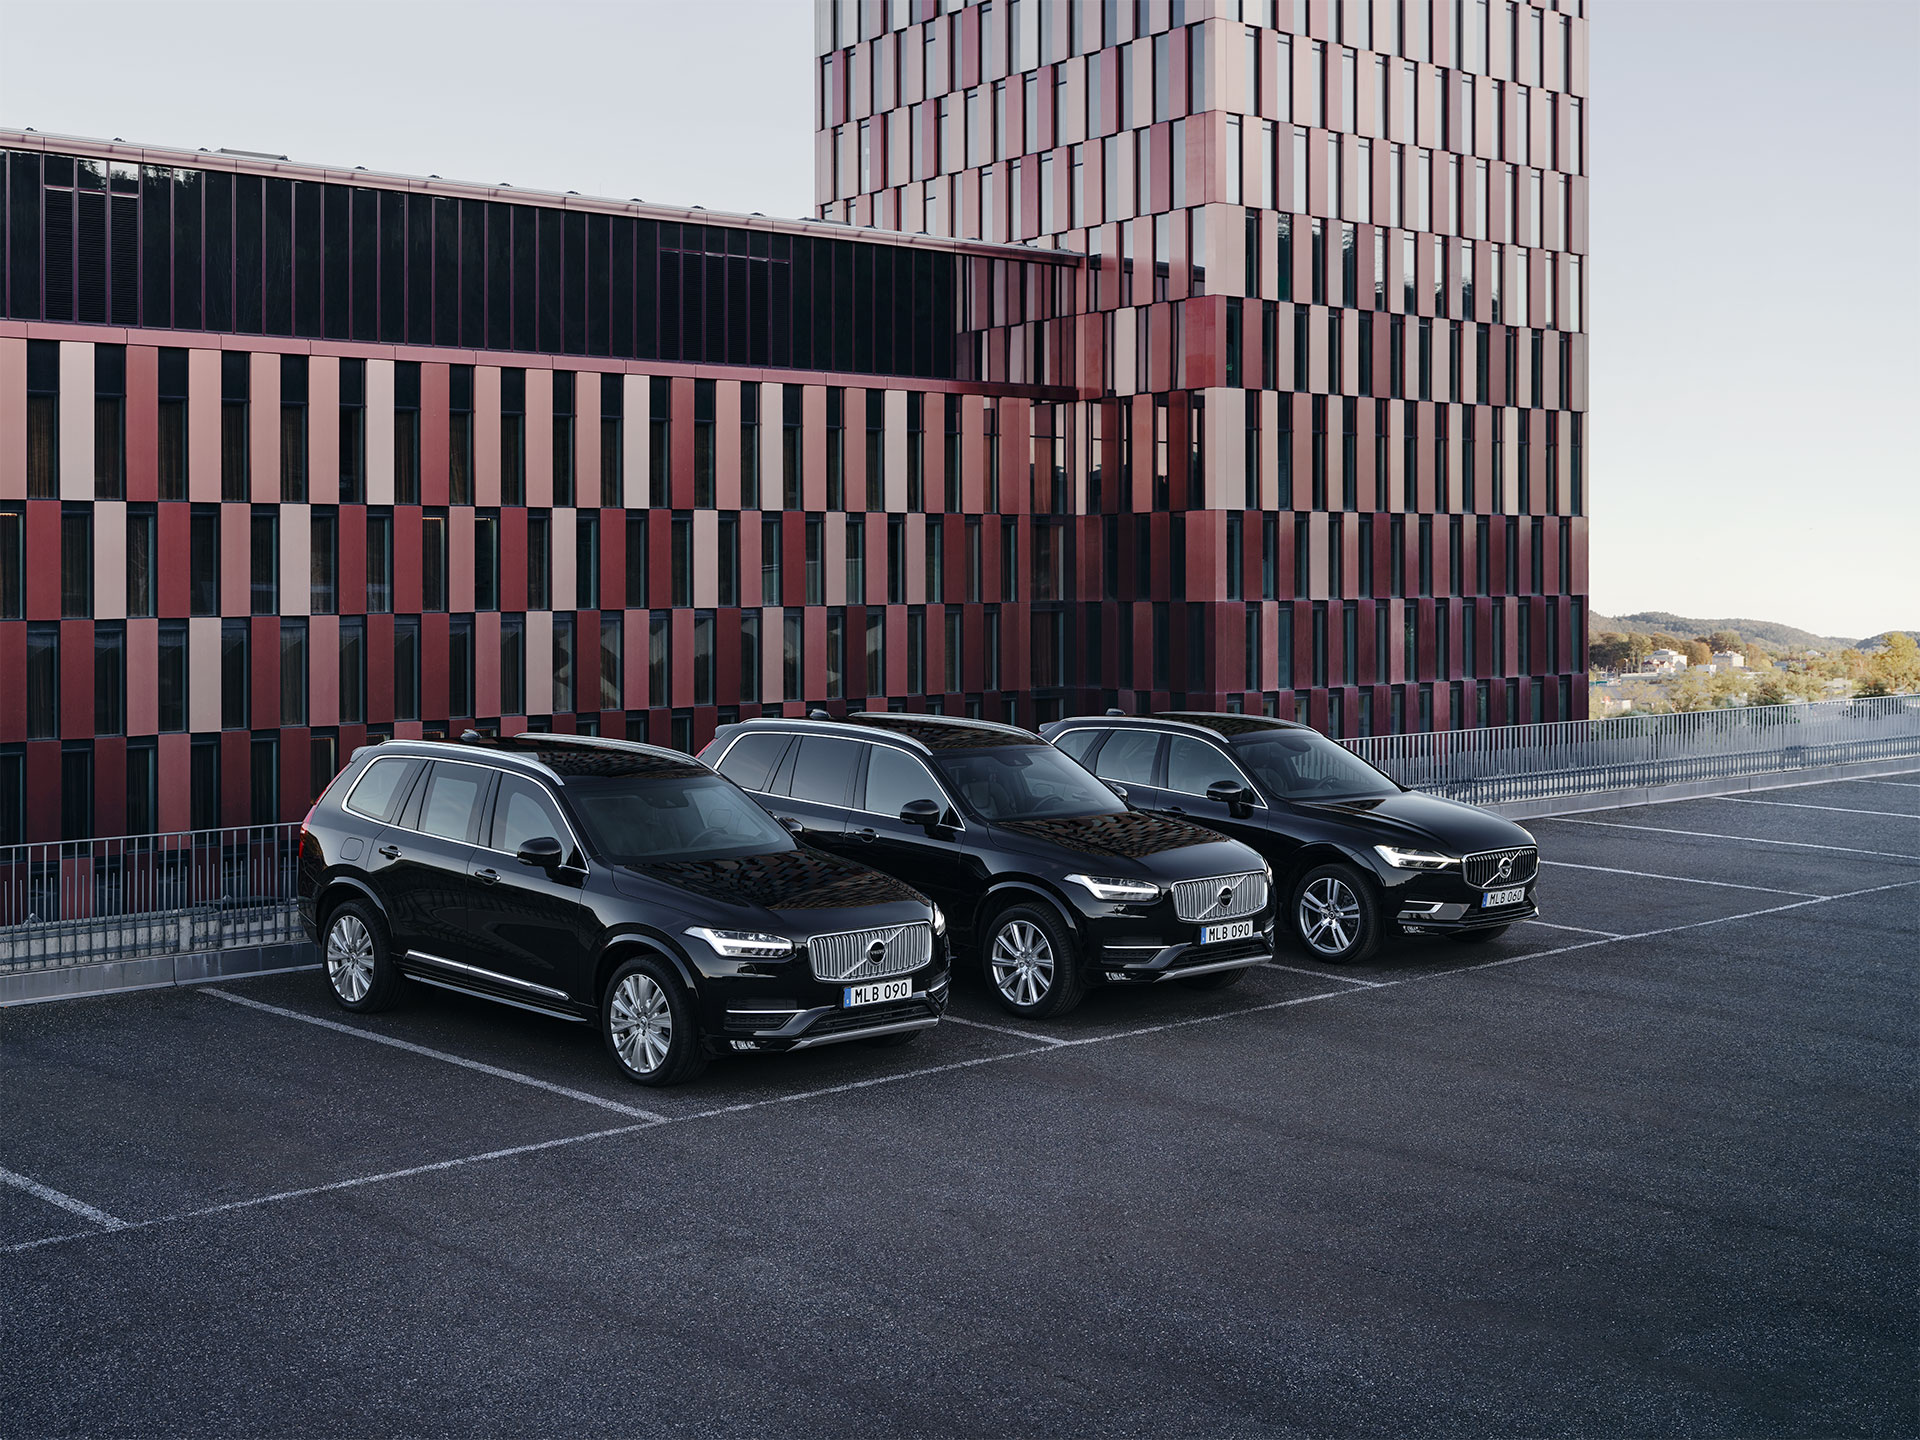 The heavy-armoured Volvo XC90 and the light-armoured XC90 and XC60 parked outside an official building.